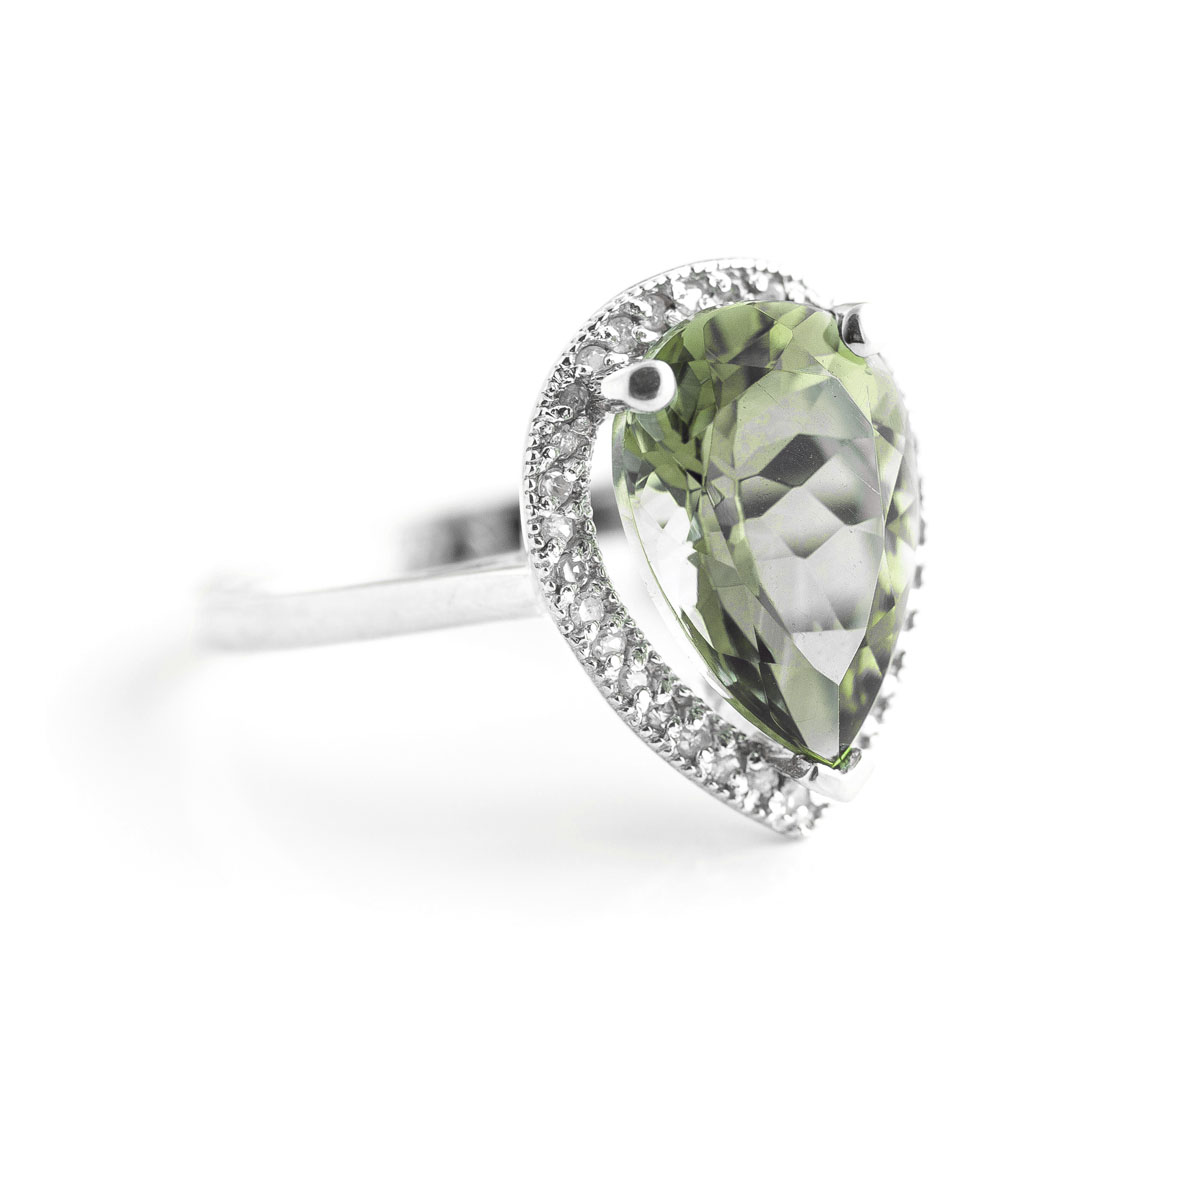 Green Amethyst Halo Ring 3.41 ctw in 18ct White Gold